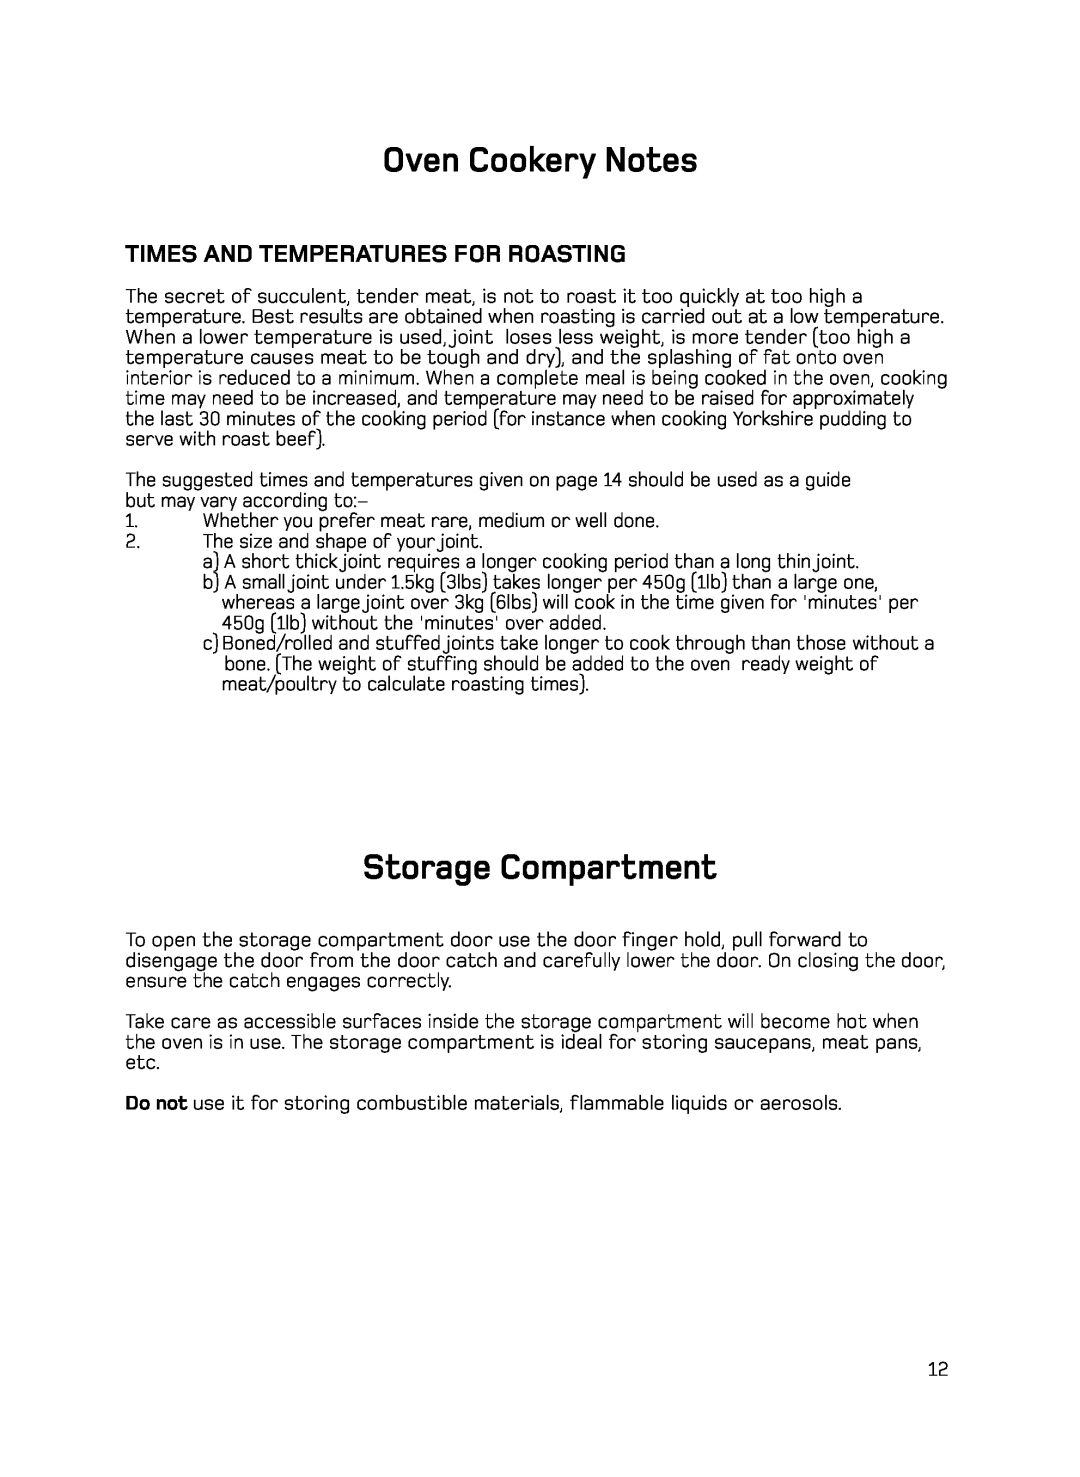 Hotpoint H050E manual Storage Compartment, Oven Cookery Notes, Times And Temperatures For Roasting 